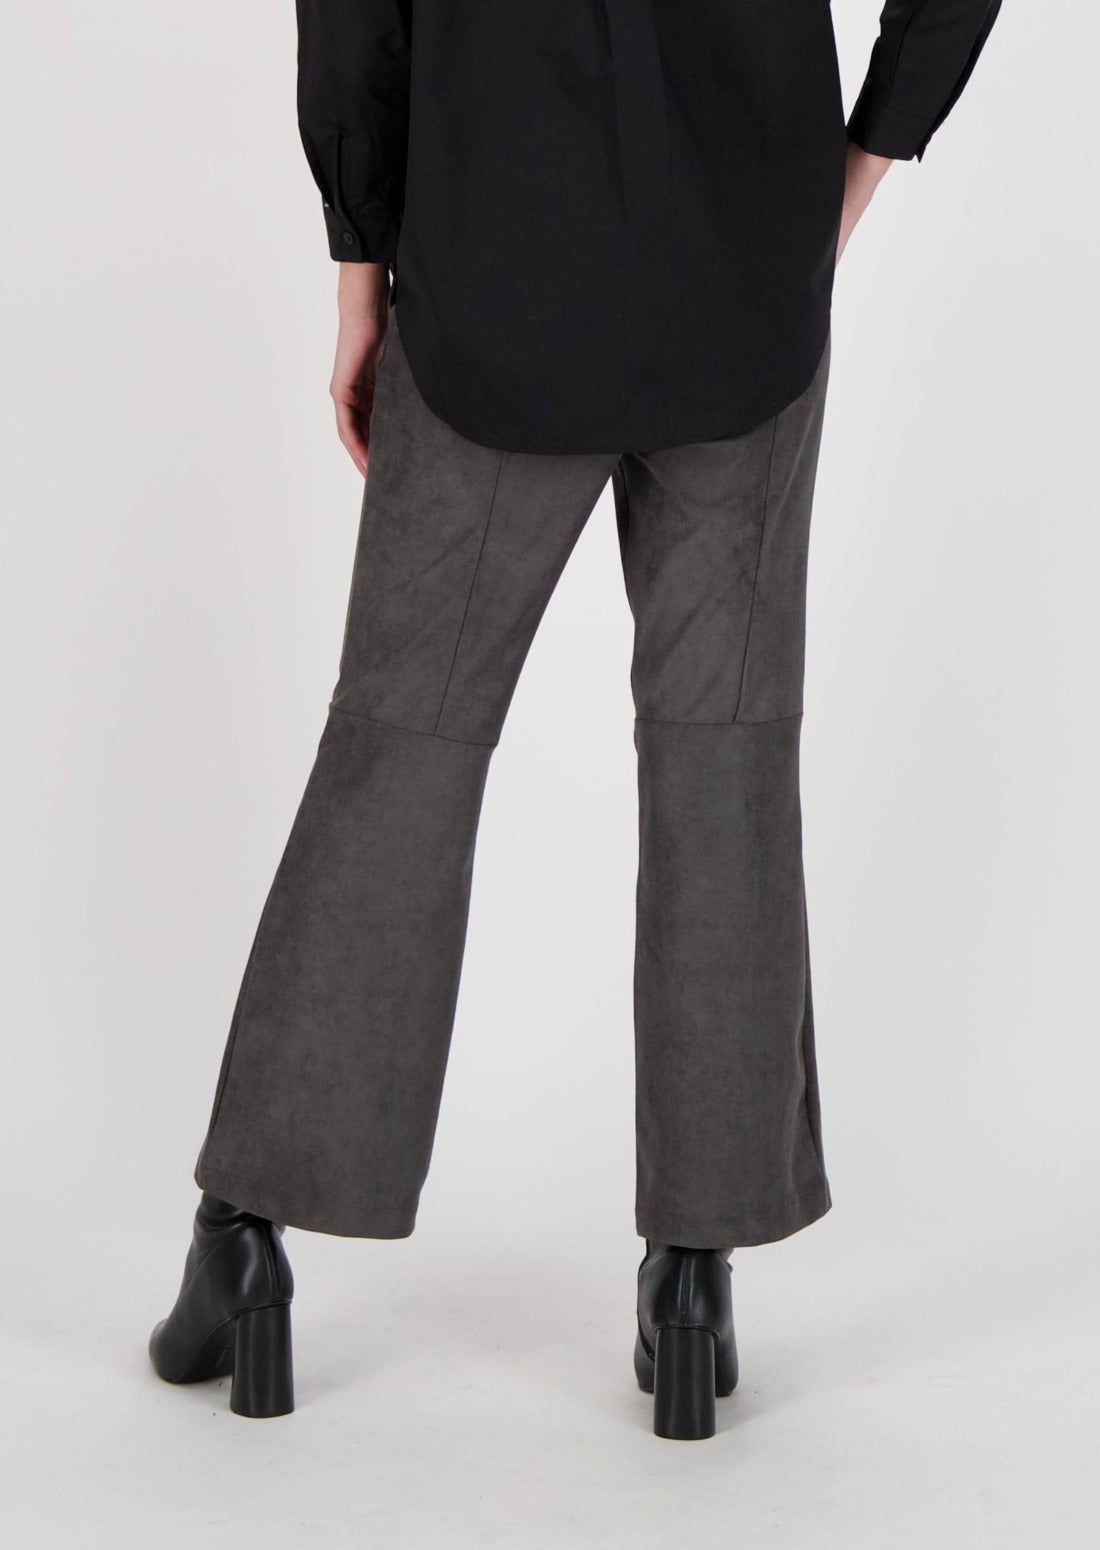 Gabby Isabella - Suede Boot Cut Pant